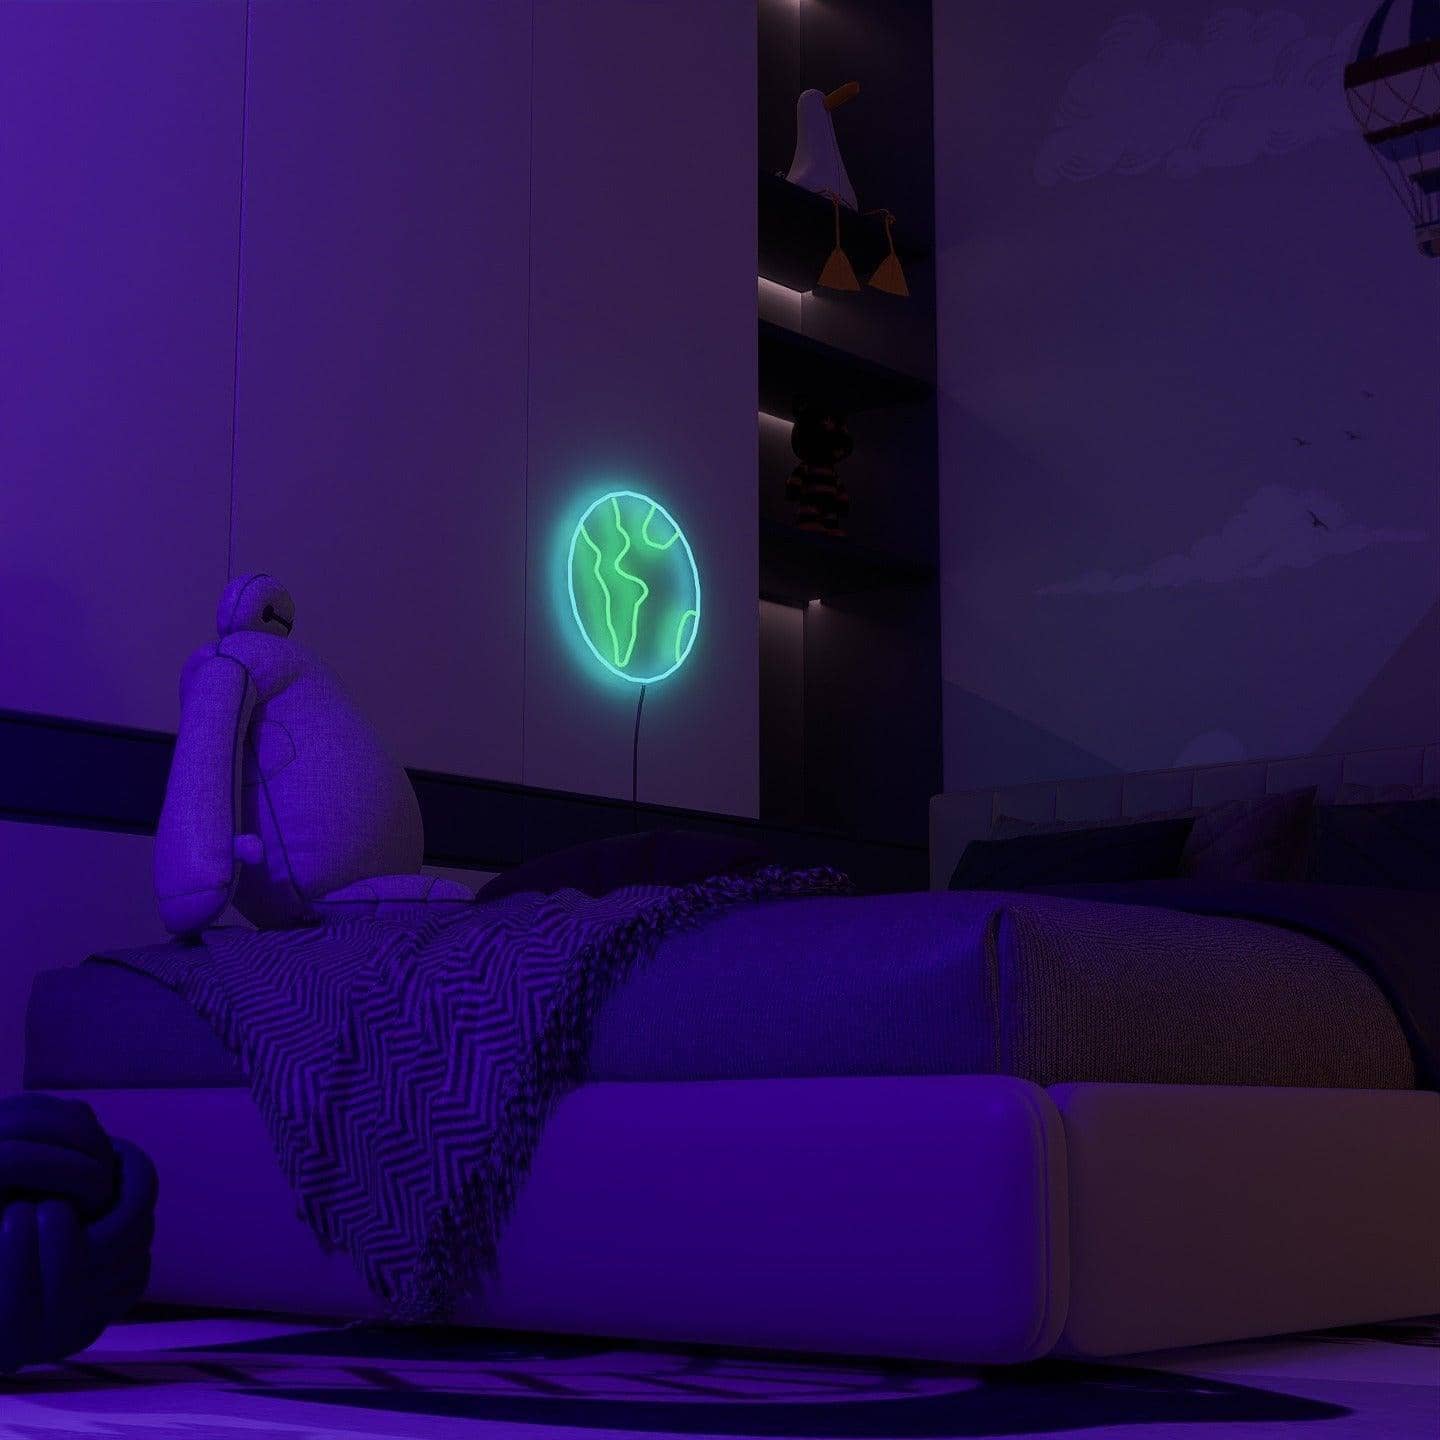 light-up-neon-lights-and-hang-them-in-your-bedroom-for-display-earth